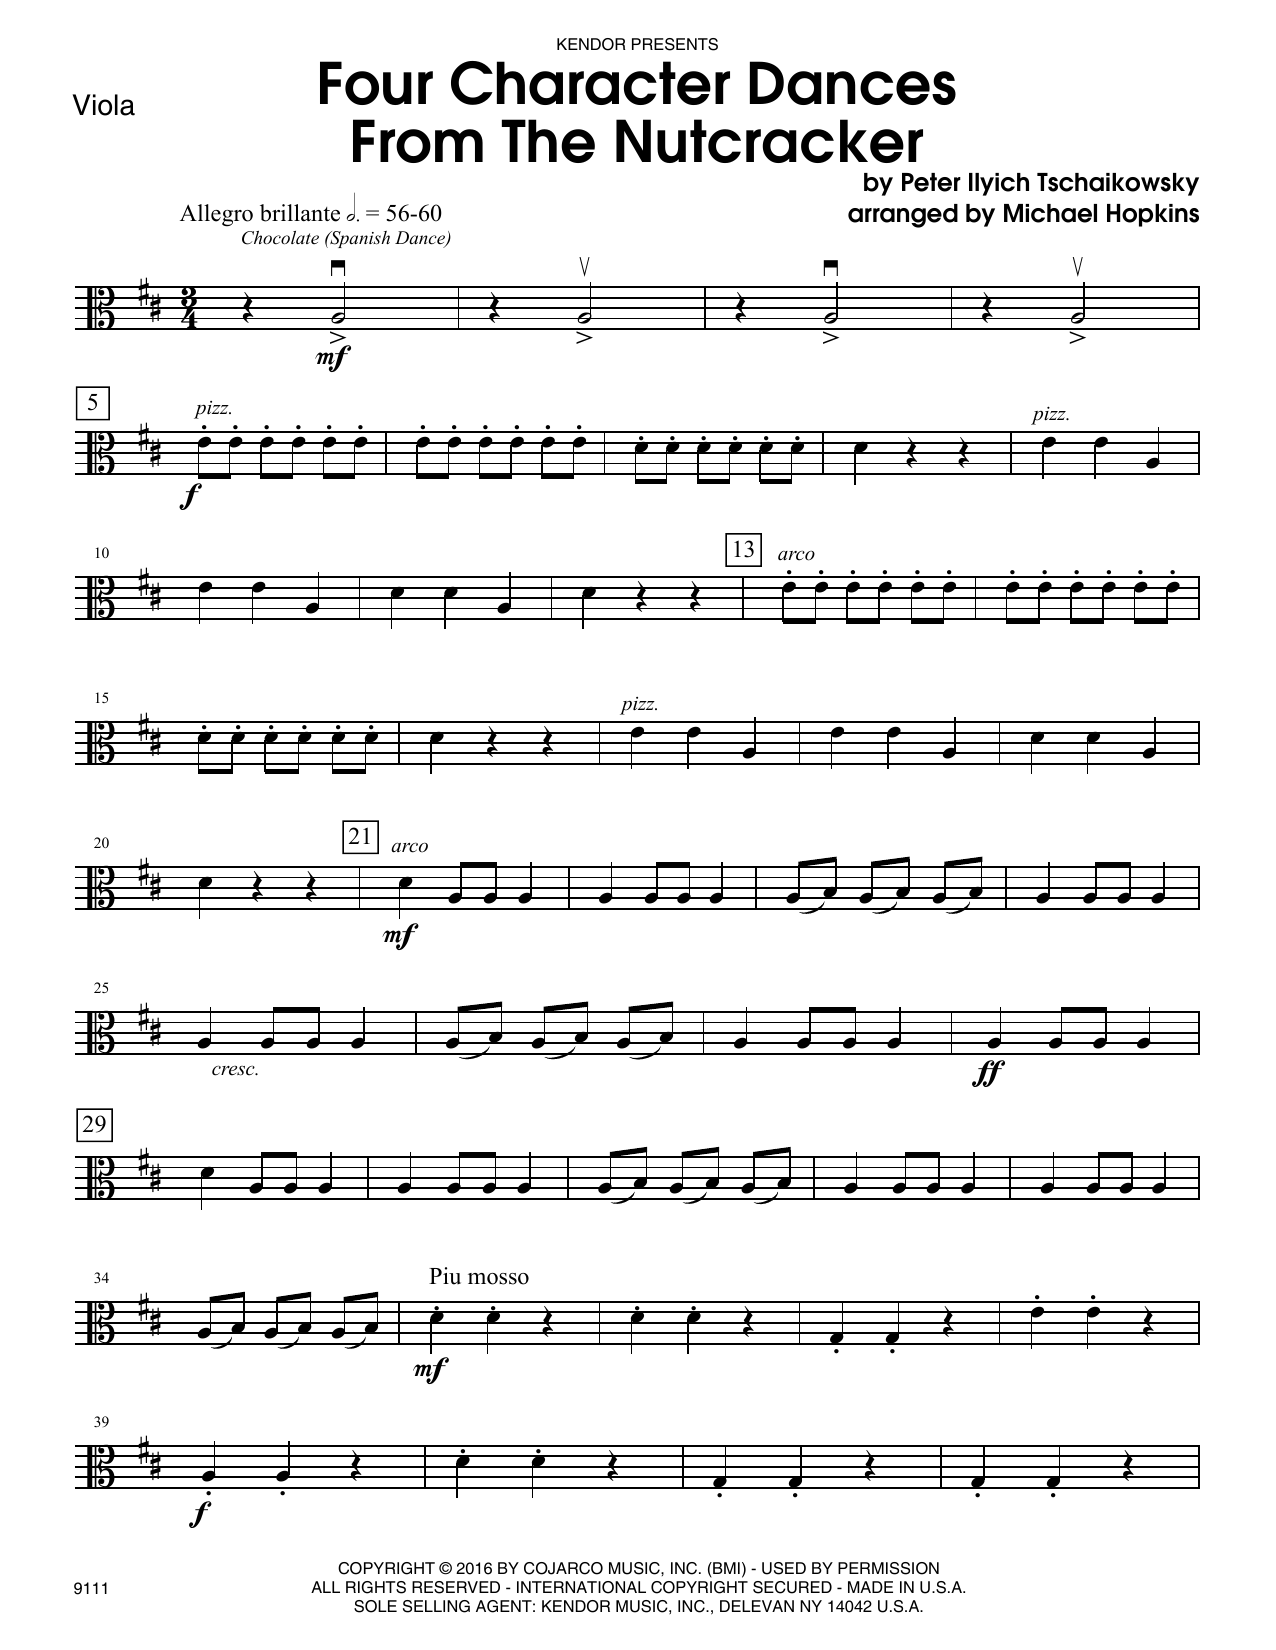 Download Michael Hopkins Four Character Dances From The Nutcrack Sheet Music